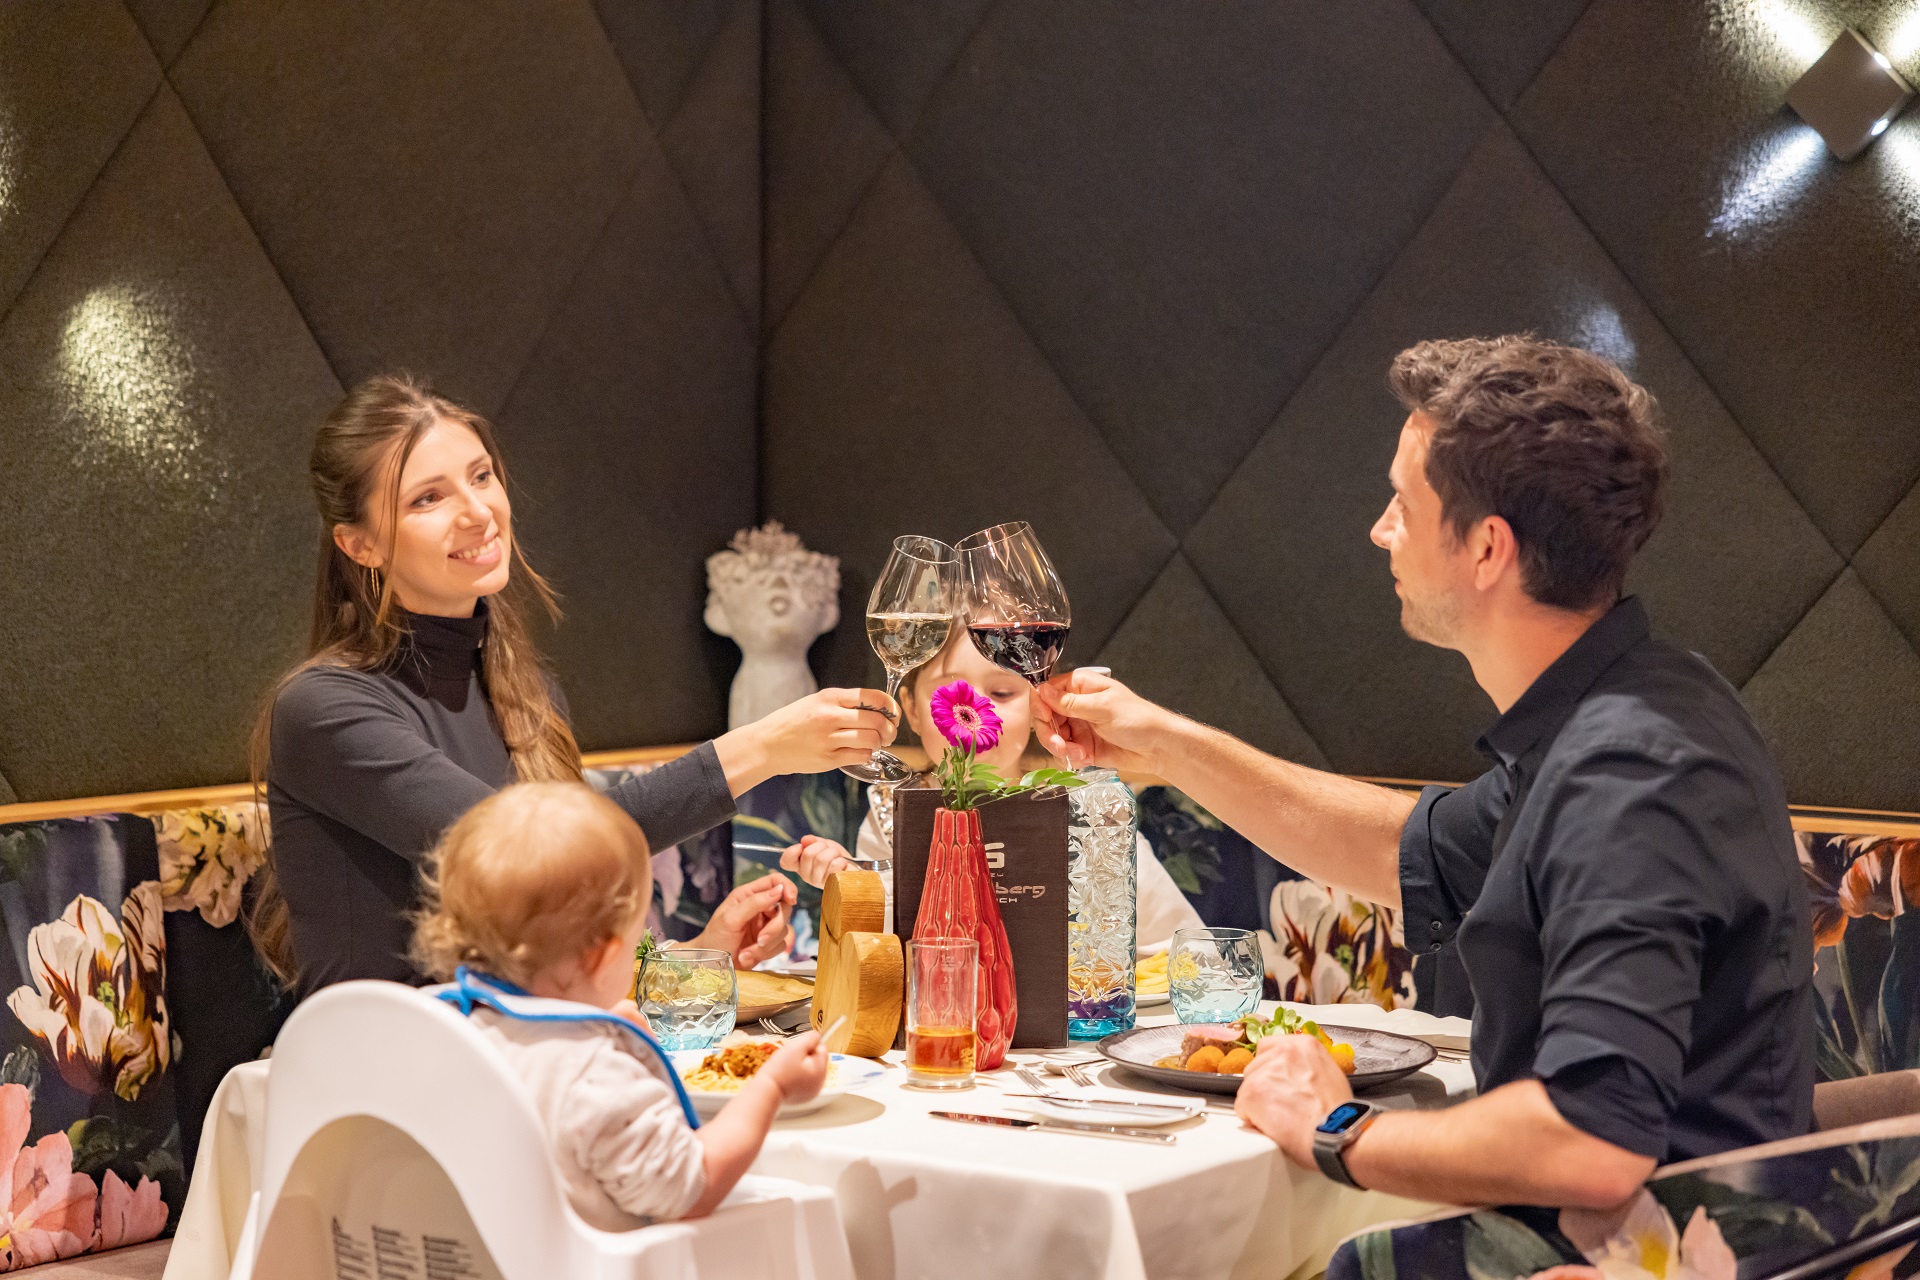 A couple with a baby enjoying dinner at a restaurant table.